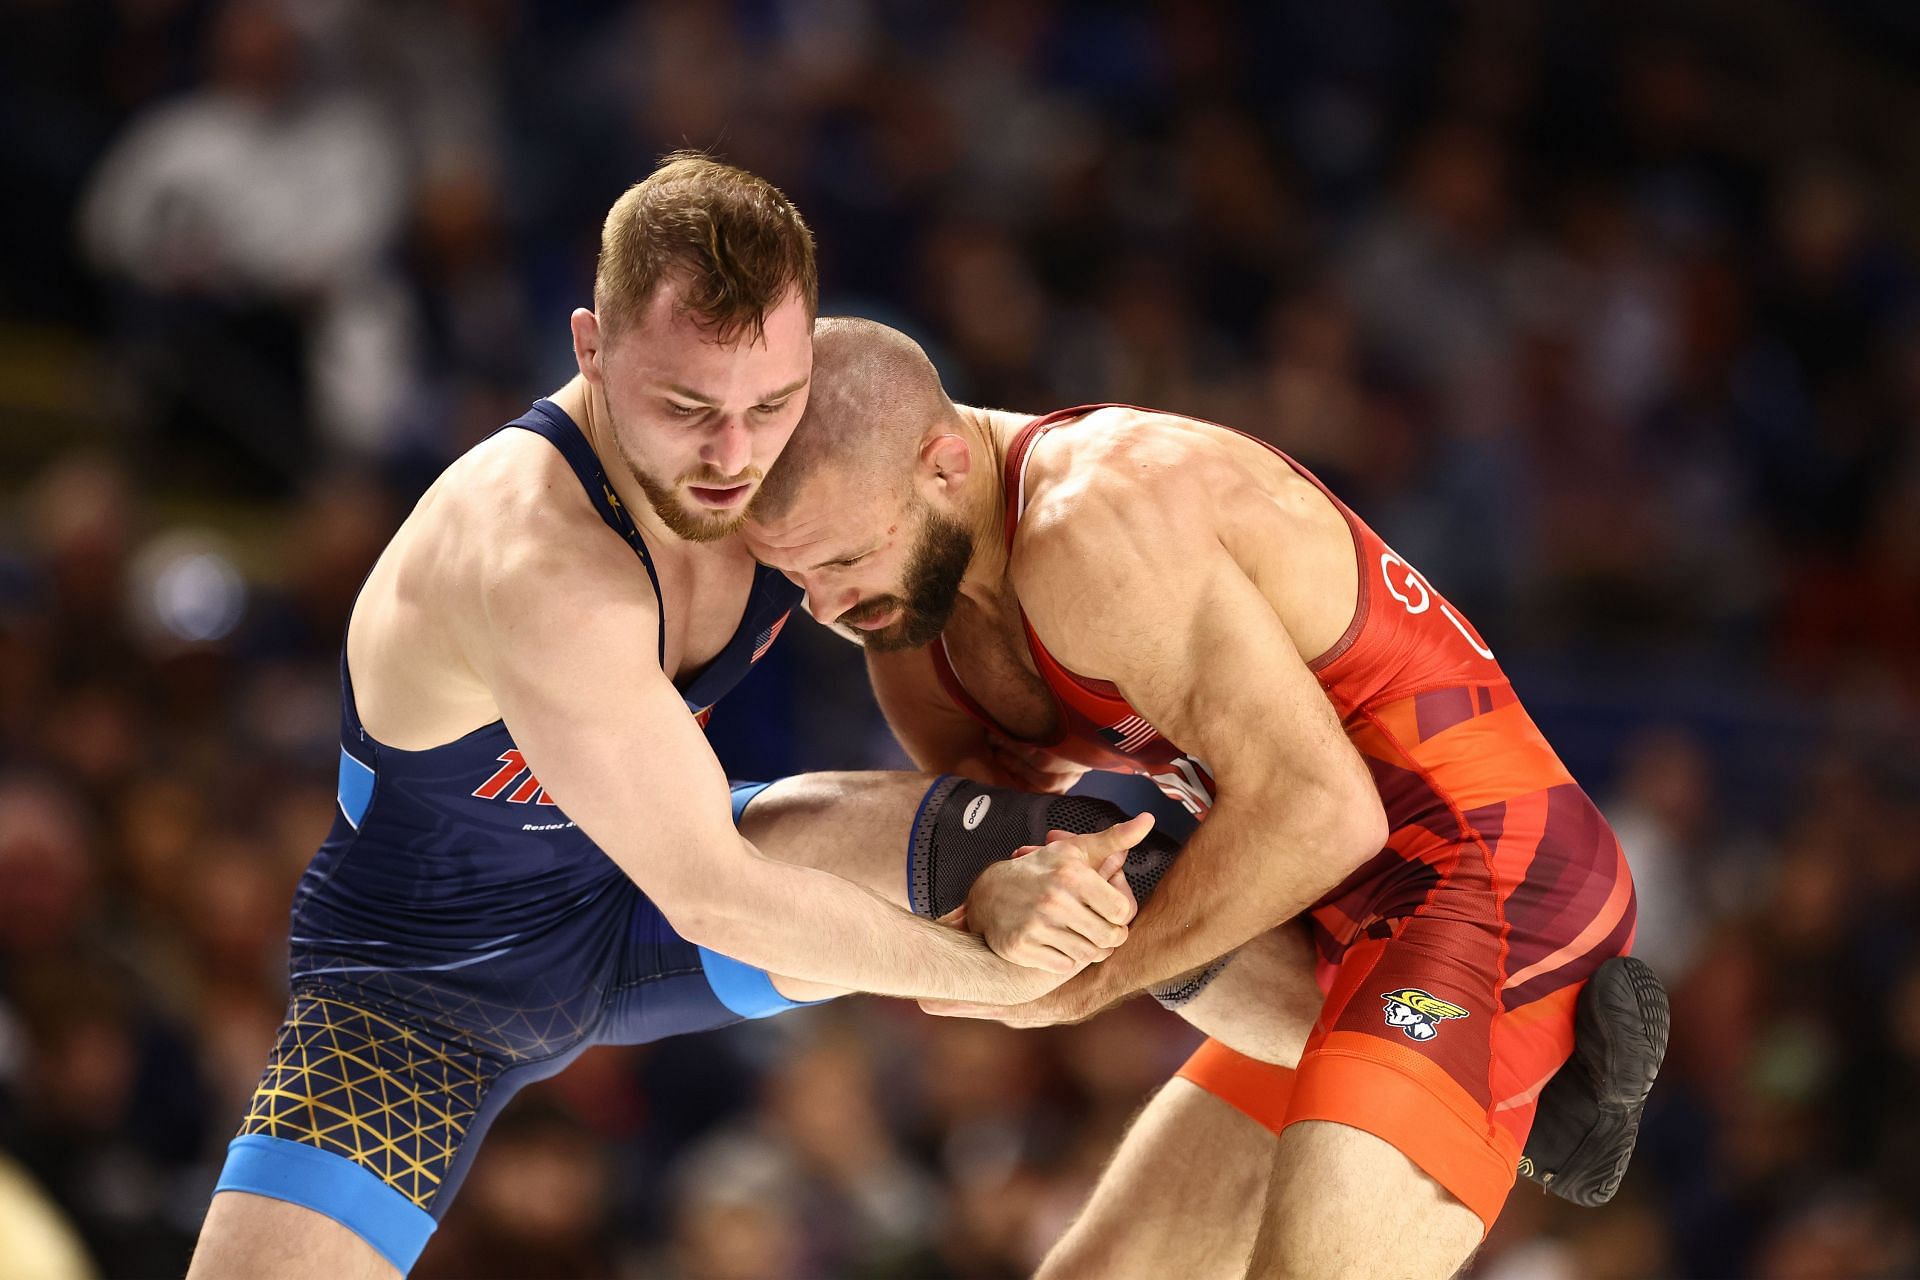 Spencer Lee and Thomas Gilman wrestle in the men&#039;s freestyle 57-KG division during the US Olympic Wrestling Trials held at the Bryce Jordan Center on April 20, 2024 in State College, Pennsylvania. (Photo by Tim Nwachukwu/Getty Images)